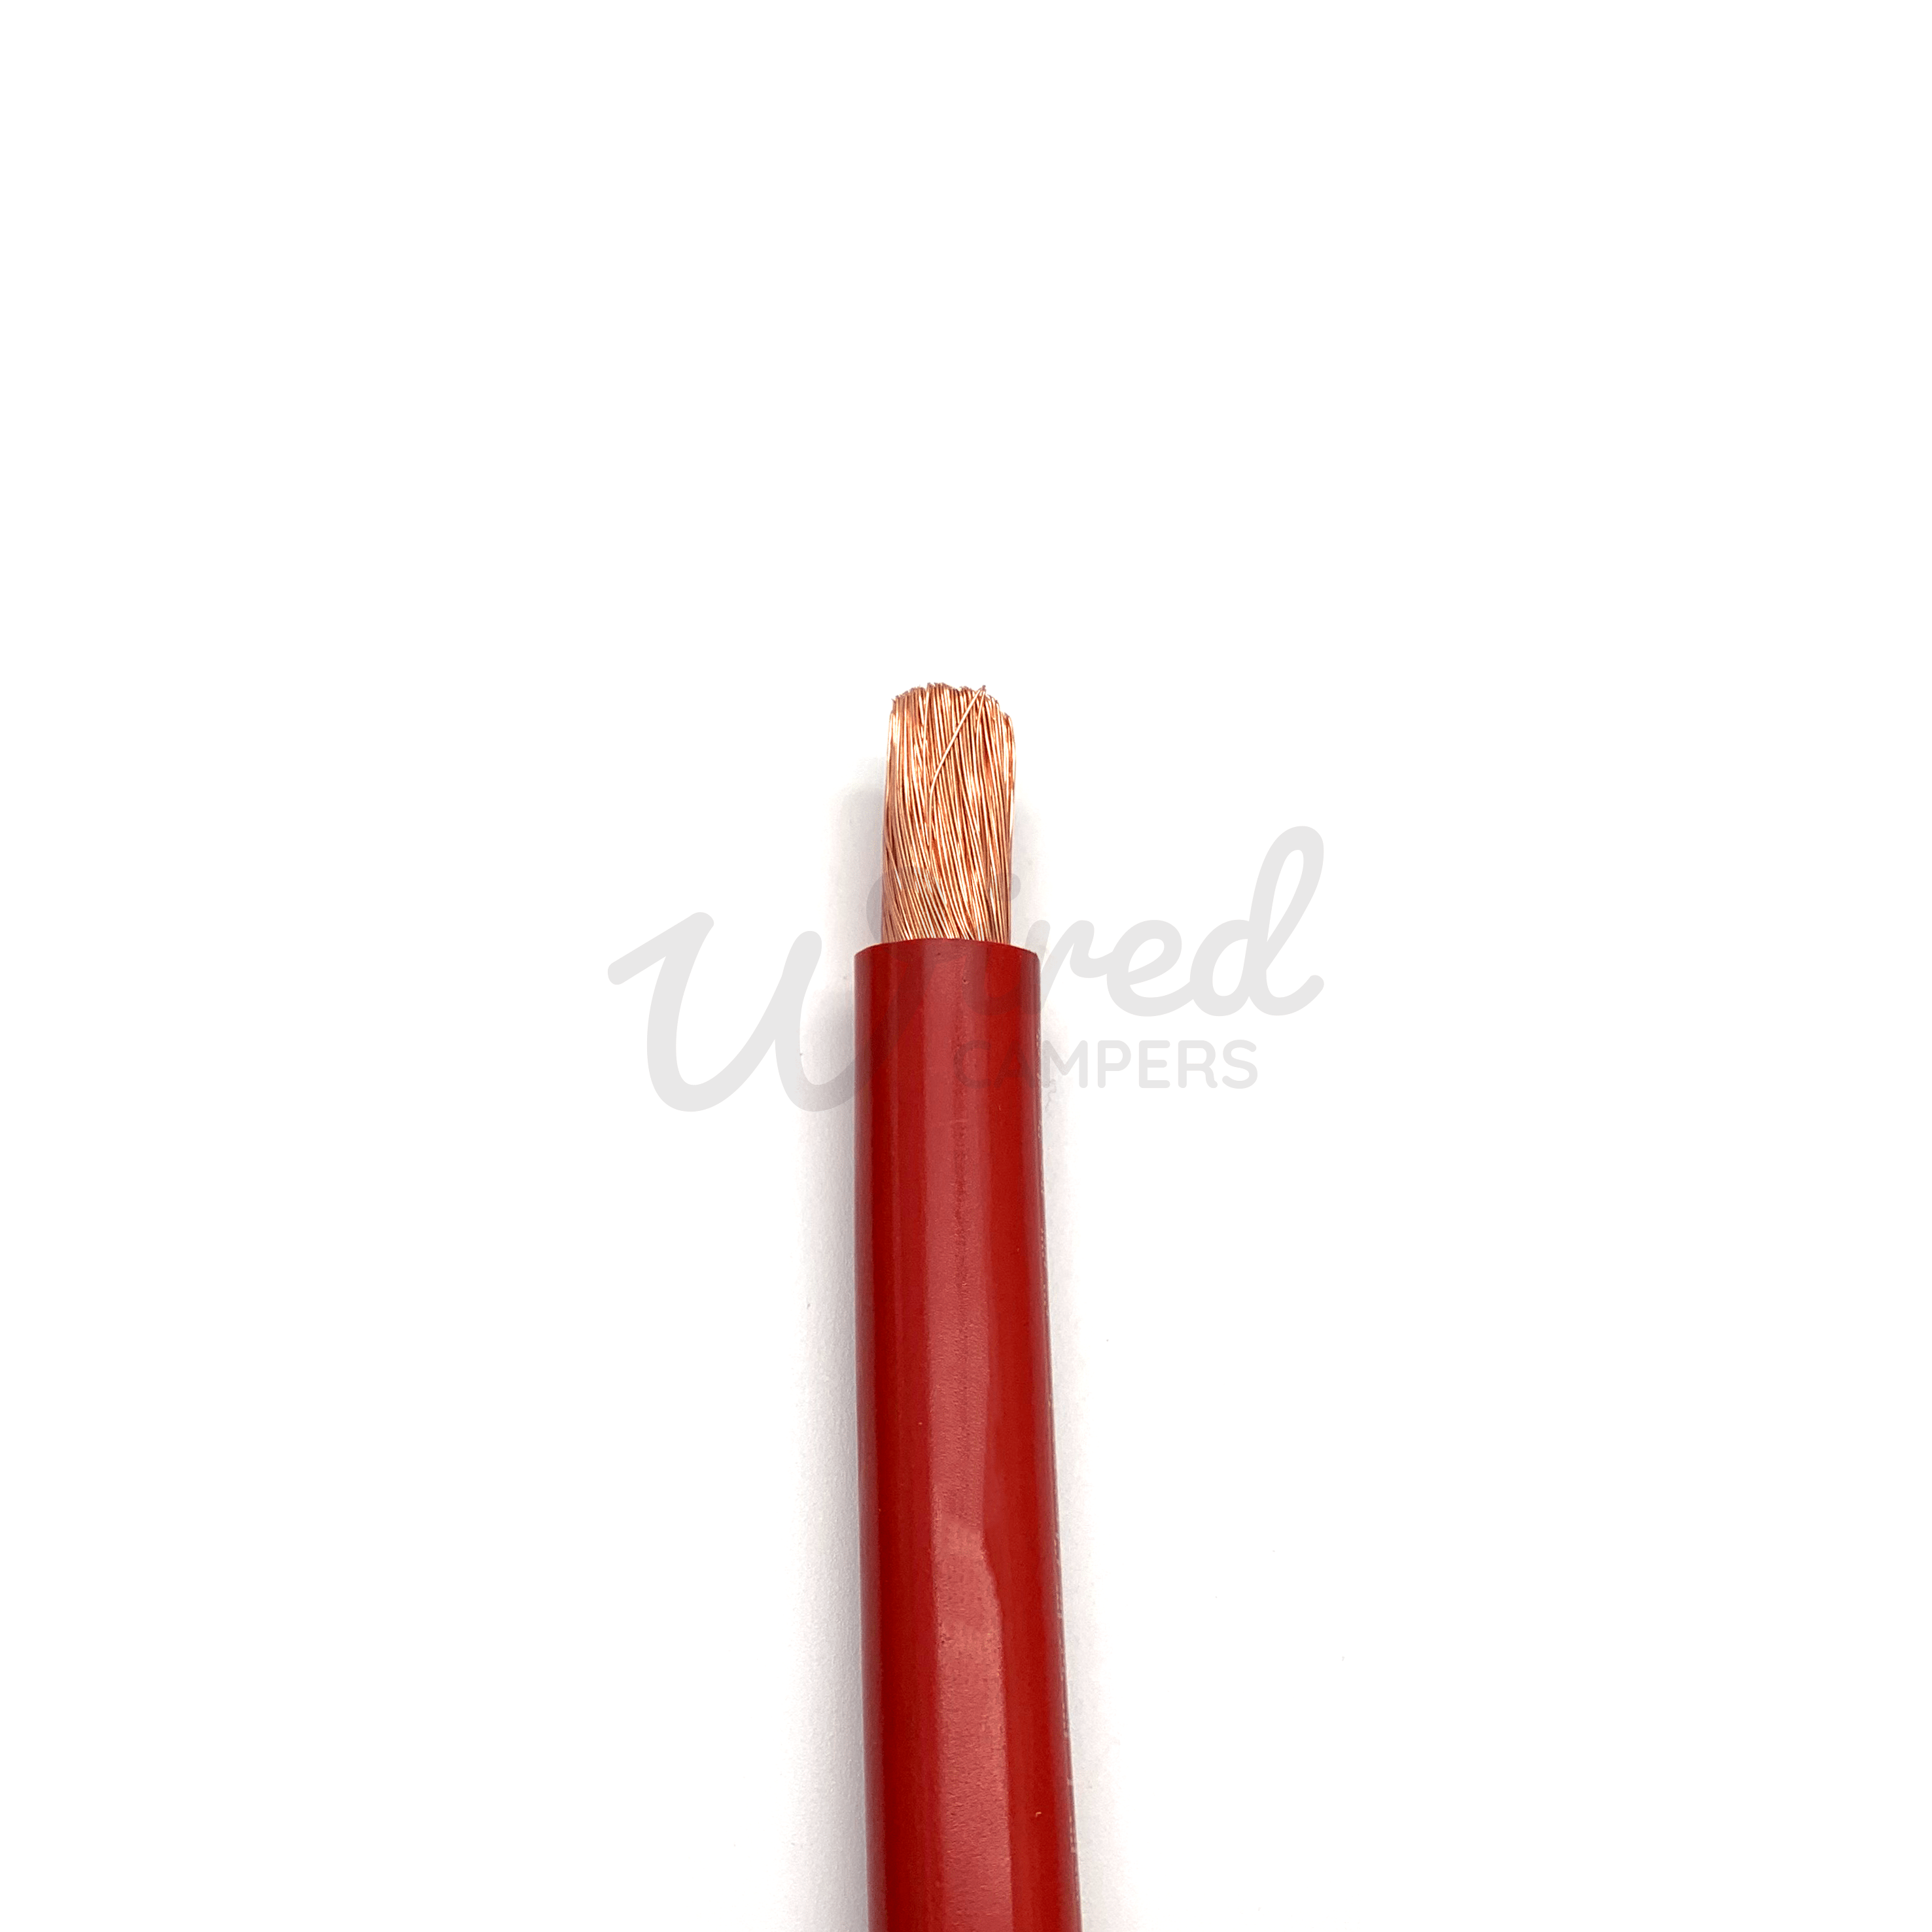 Wired Campers Limited 100M - 16mm2 110A Hi-Flex Battery/Welding/Inverter Flexible Cable - Red Positive